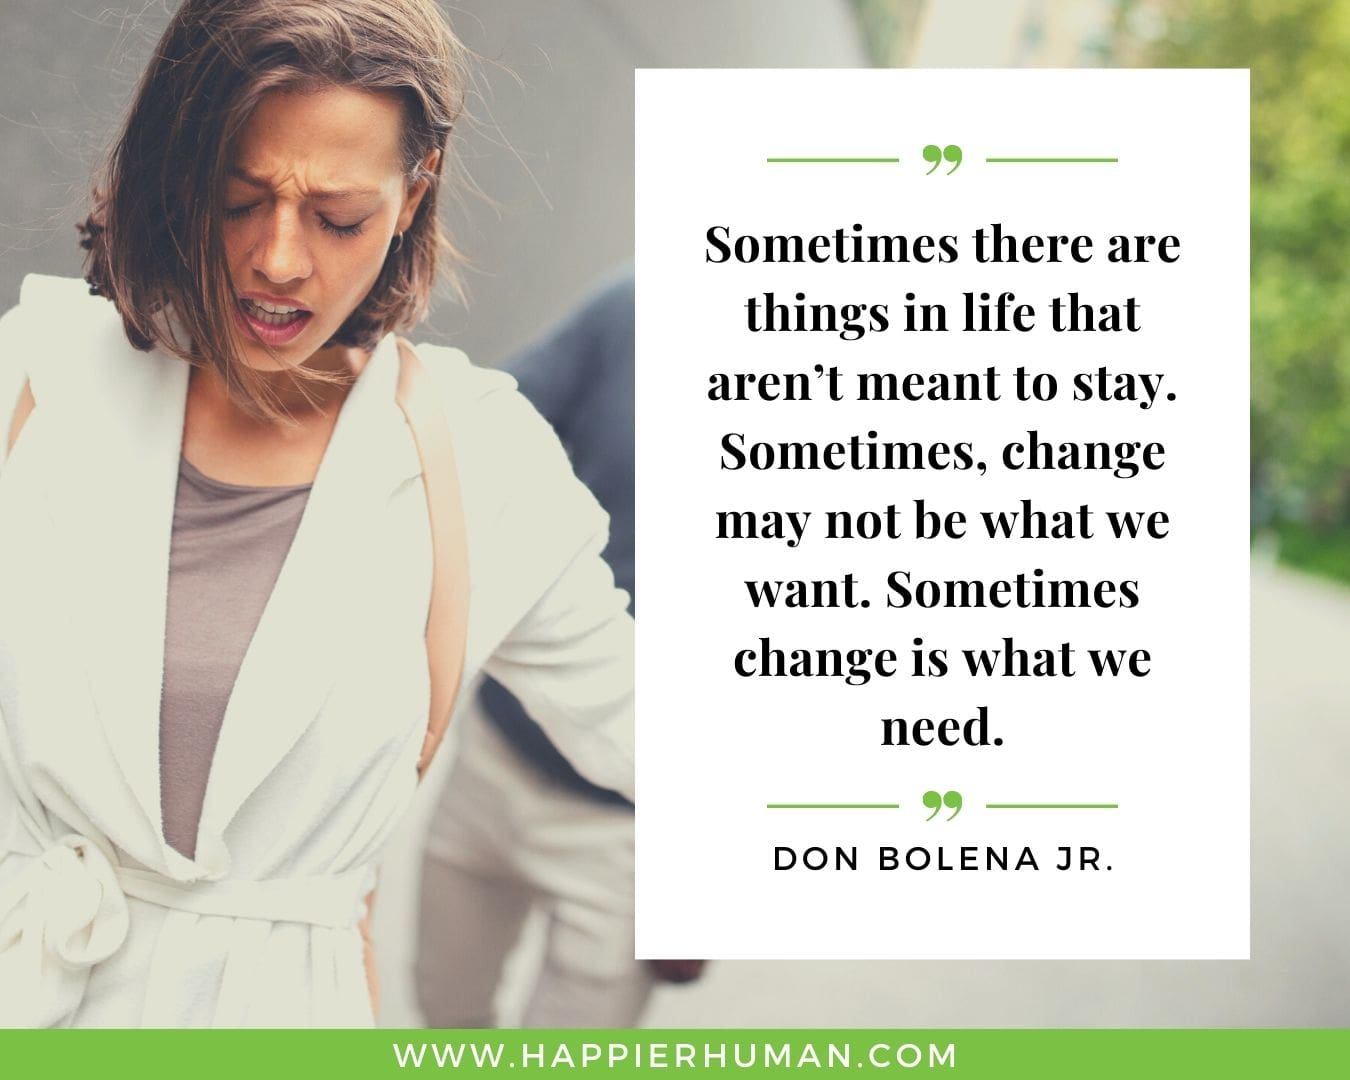 Toxic People Quotes - “Sometimes there are things in life that aren’t meant to stay. Sometimes, change may not be what we want. Sometimes change is what we need.” – Don Bolena Jr.